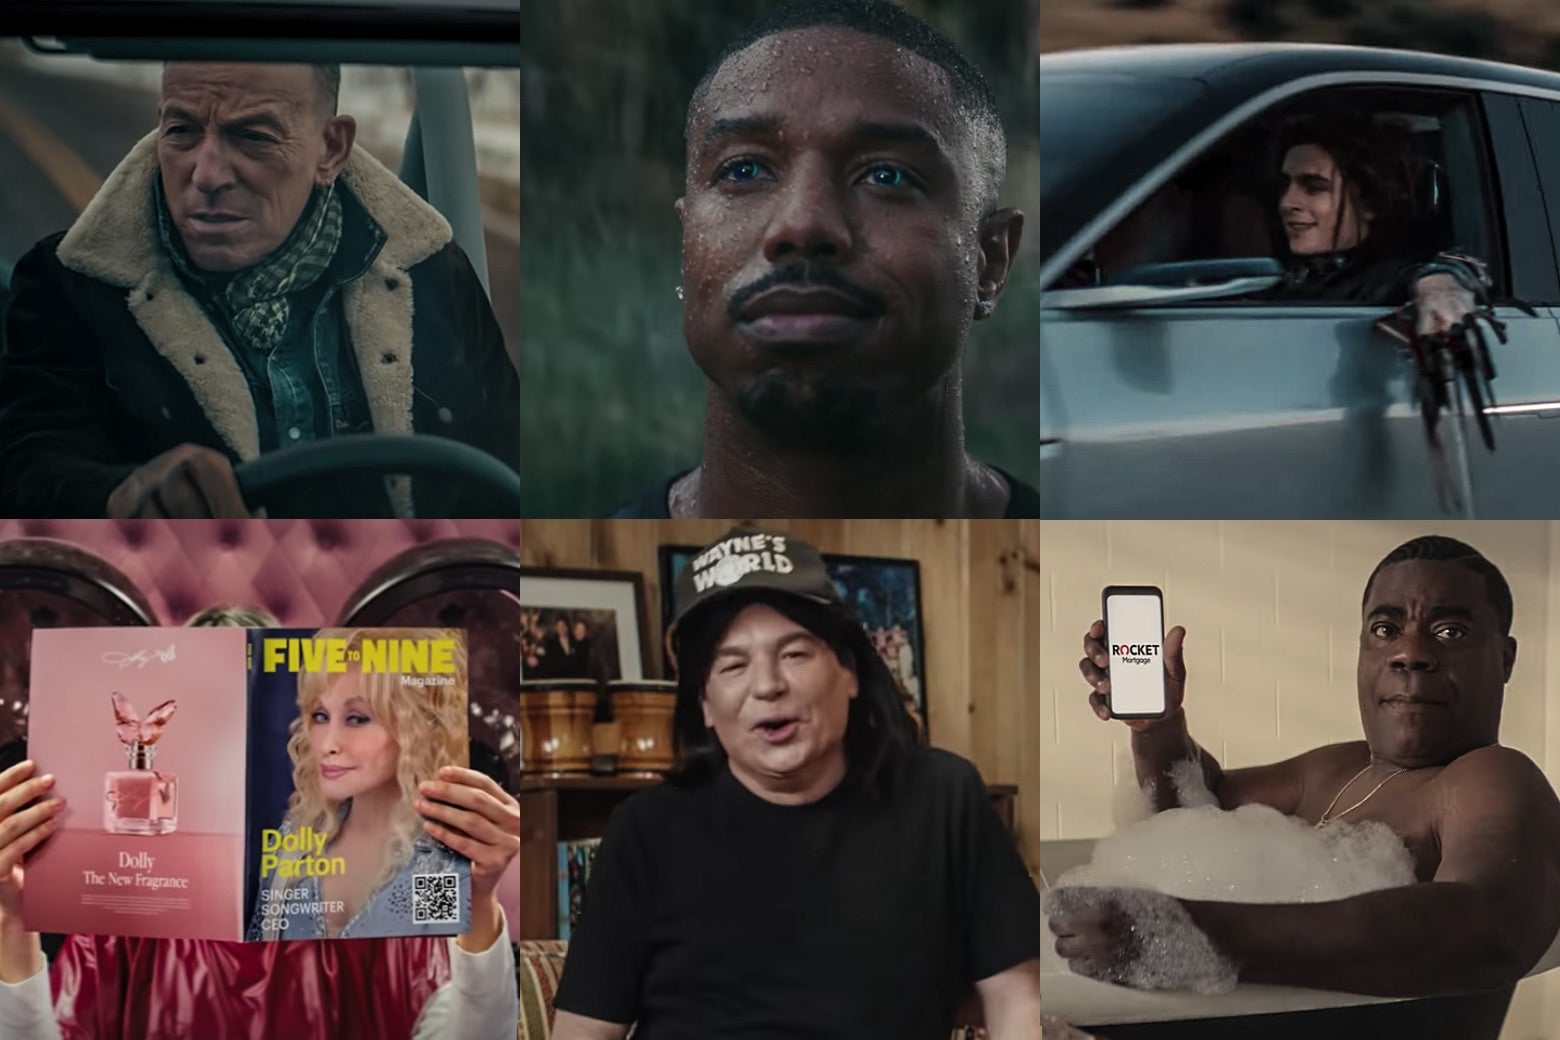 Collage of stills from ads featuring Bruce Springsteen, Michael B. Jordan, Timothée Chalamet, Tracy Morgan, Mike Myers, and Dolly Parton.